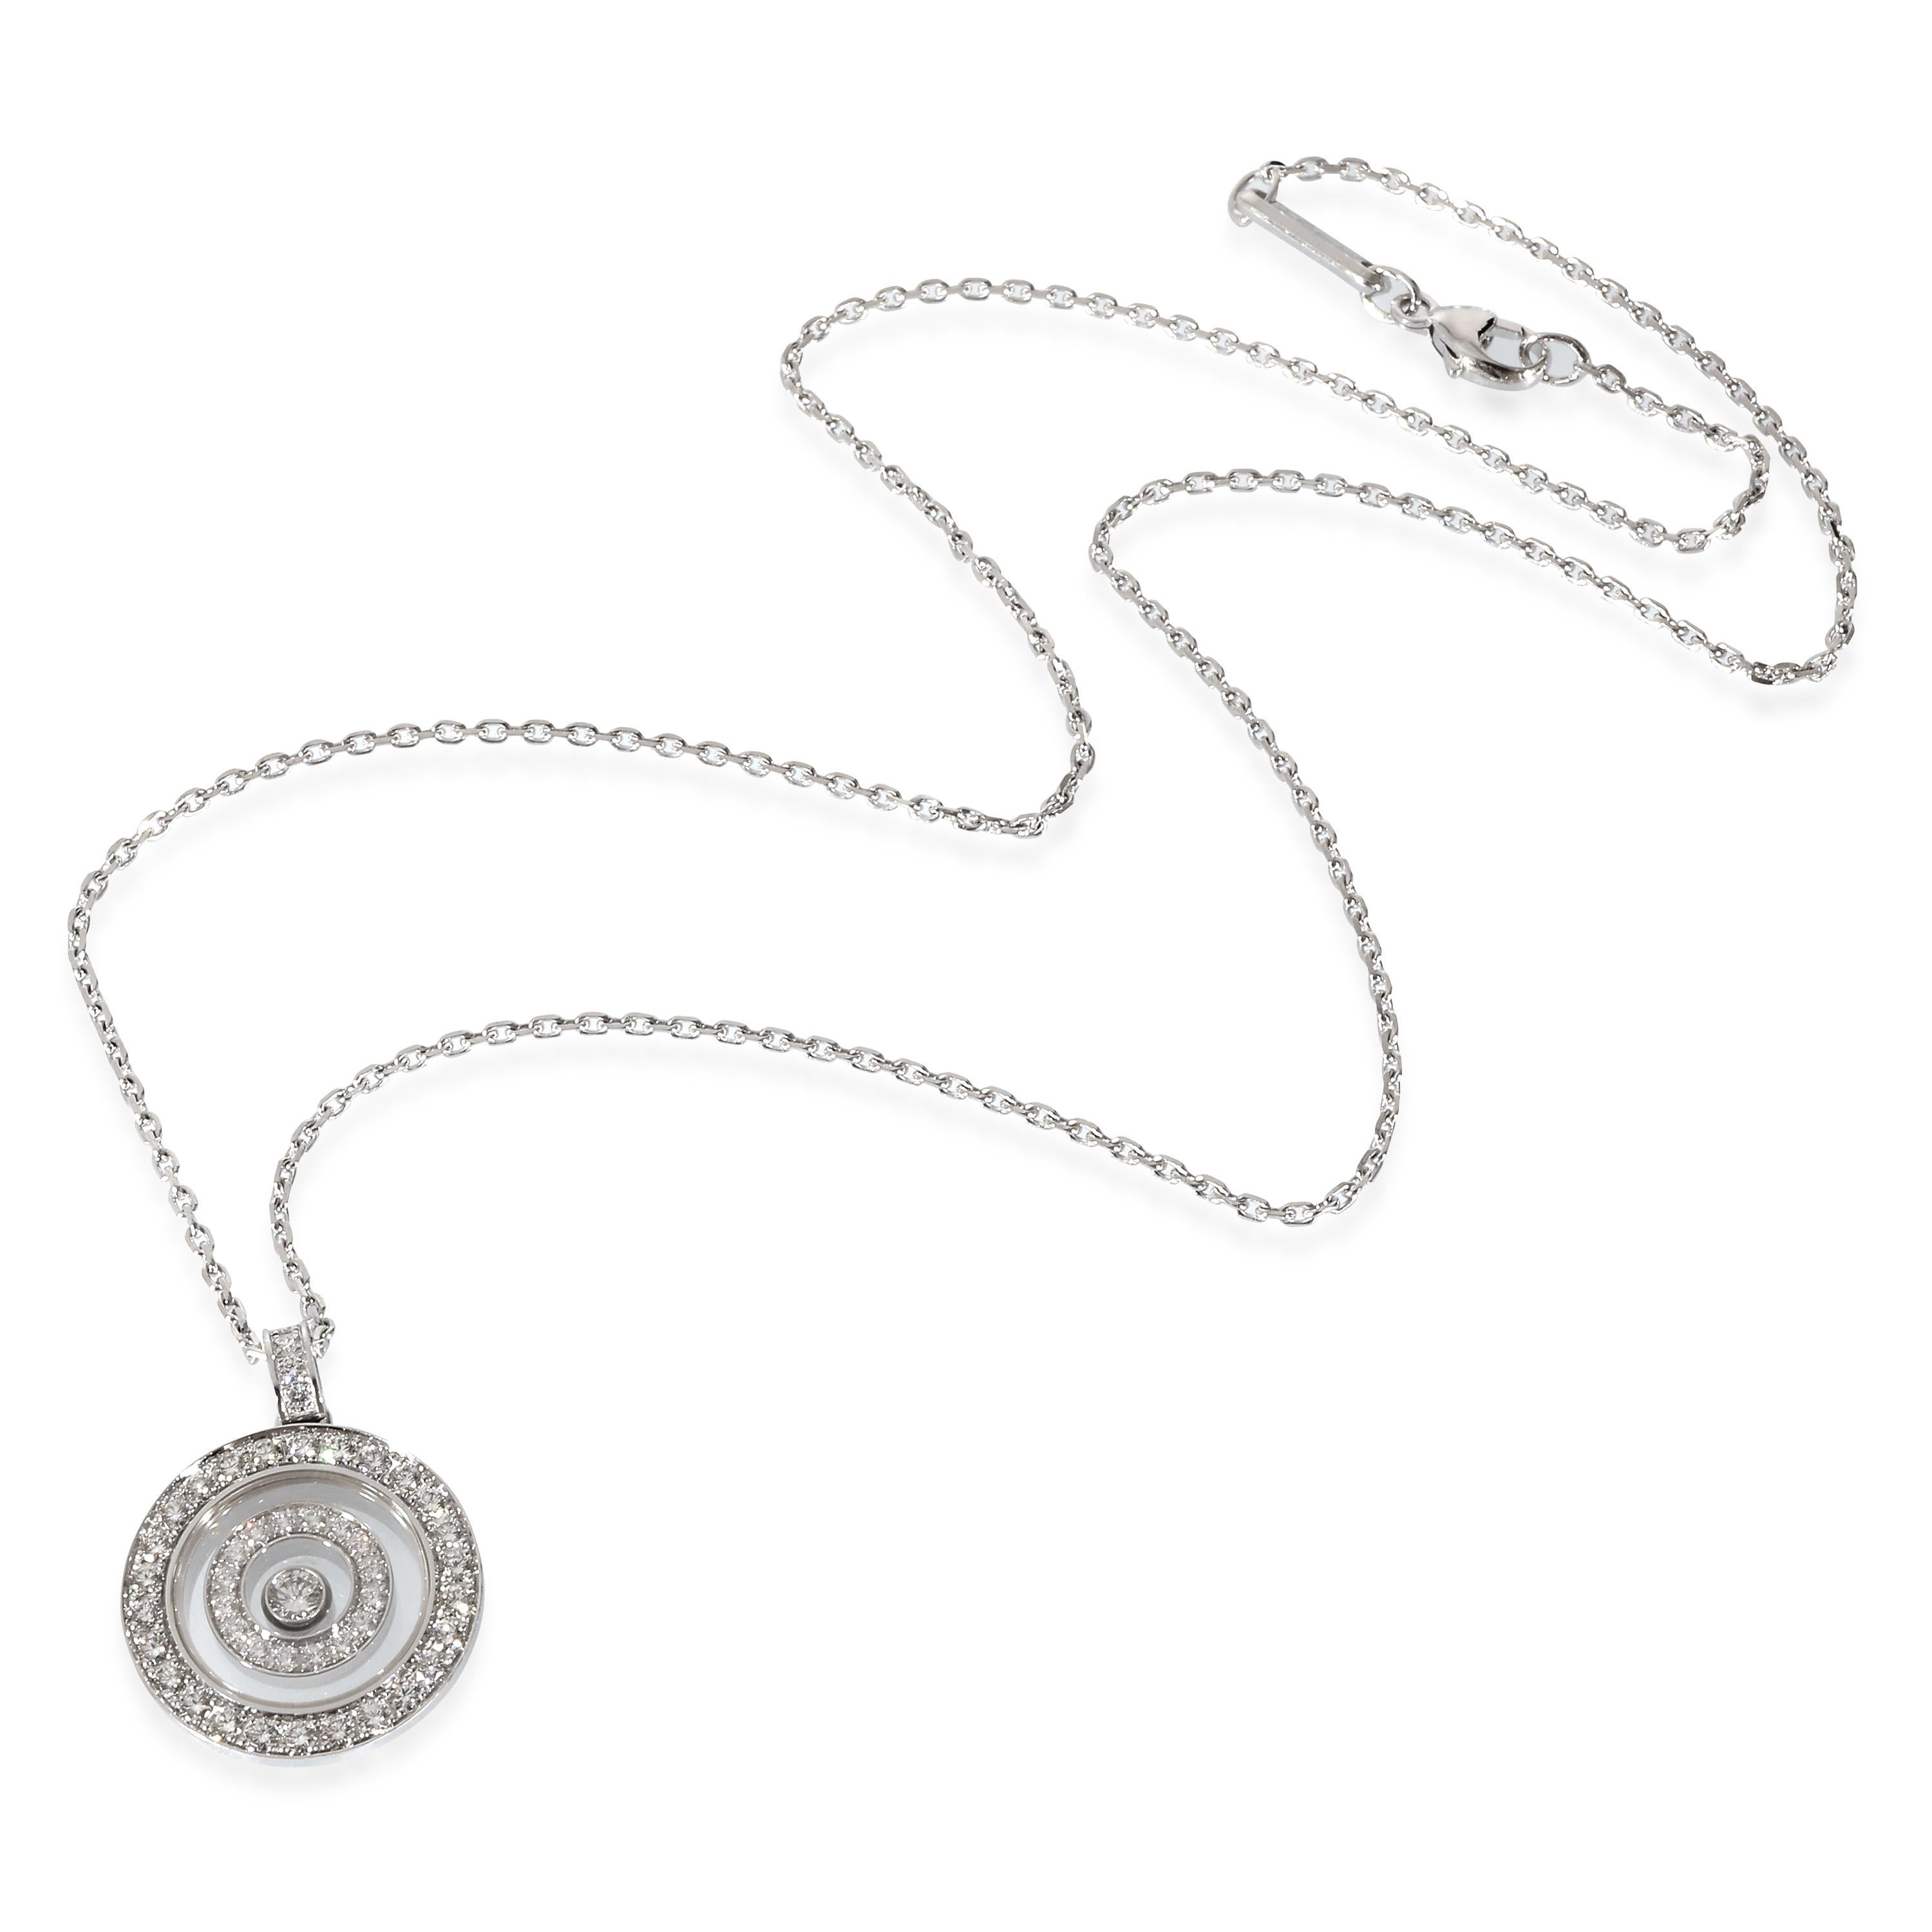 Chopard Happy Spirit Circle Diamond Necklace in 18K White Gold 0.72 CTW

PRIMARY DETAILS
SKU: 134973
Listing Title: Chopard Happy Spirit Circle Diamond Necklace in 18K White Gold 0.72 CTW
Condition Description: A celebration of small diamonds, the